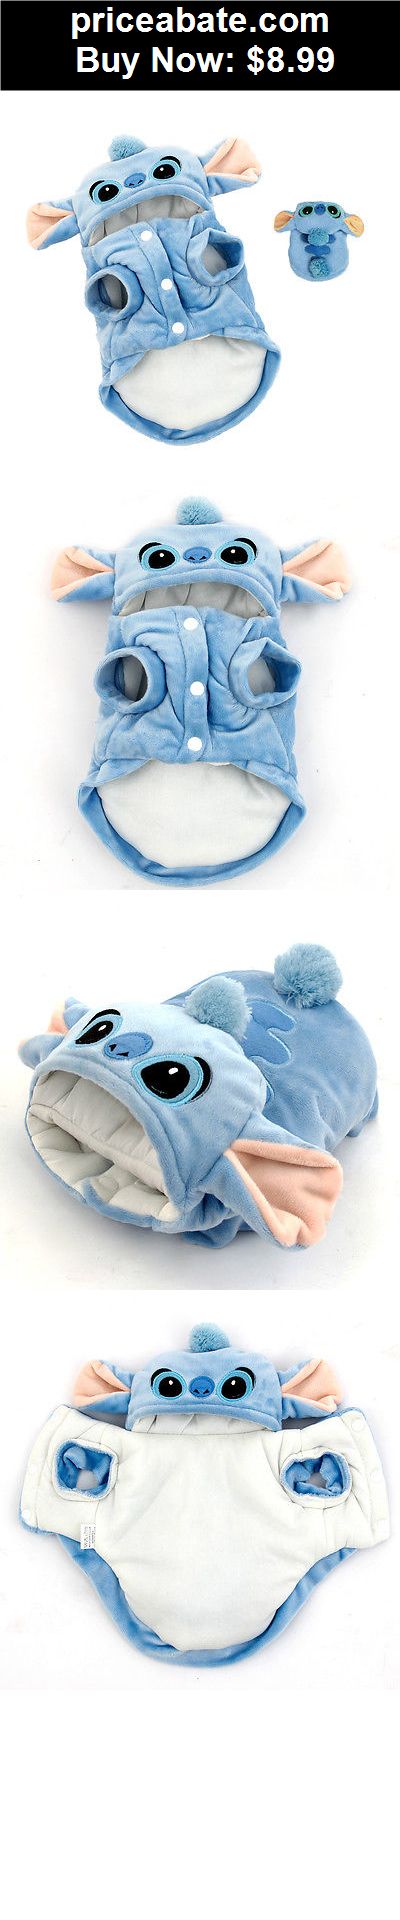 Animals-Dog: Cartoon Stitch Dog Clothes Pet Jacket Coat Puppy Cat Costumes Apparel Winter - BUY IT NOW ONLY $